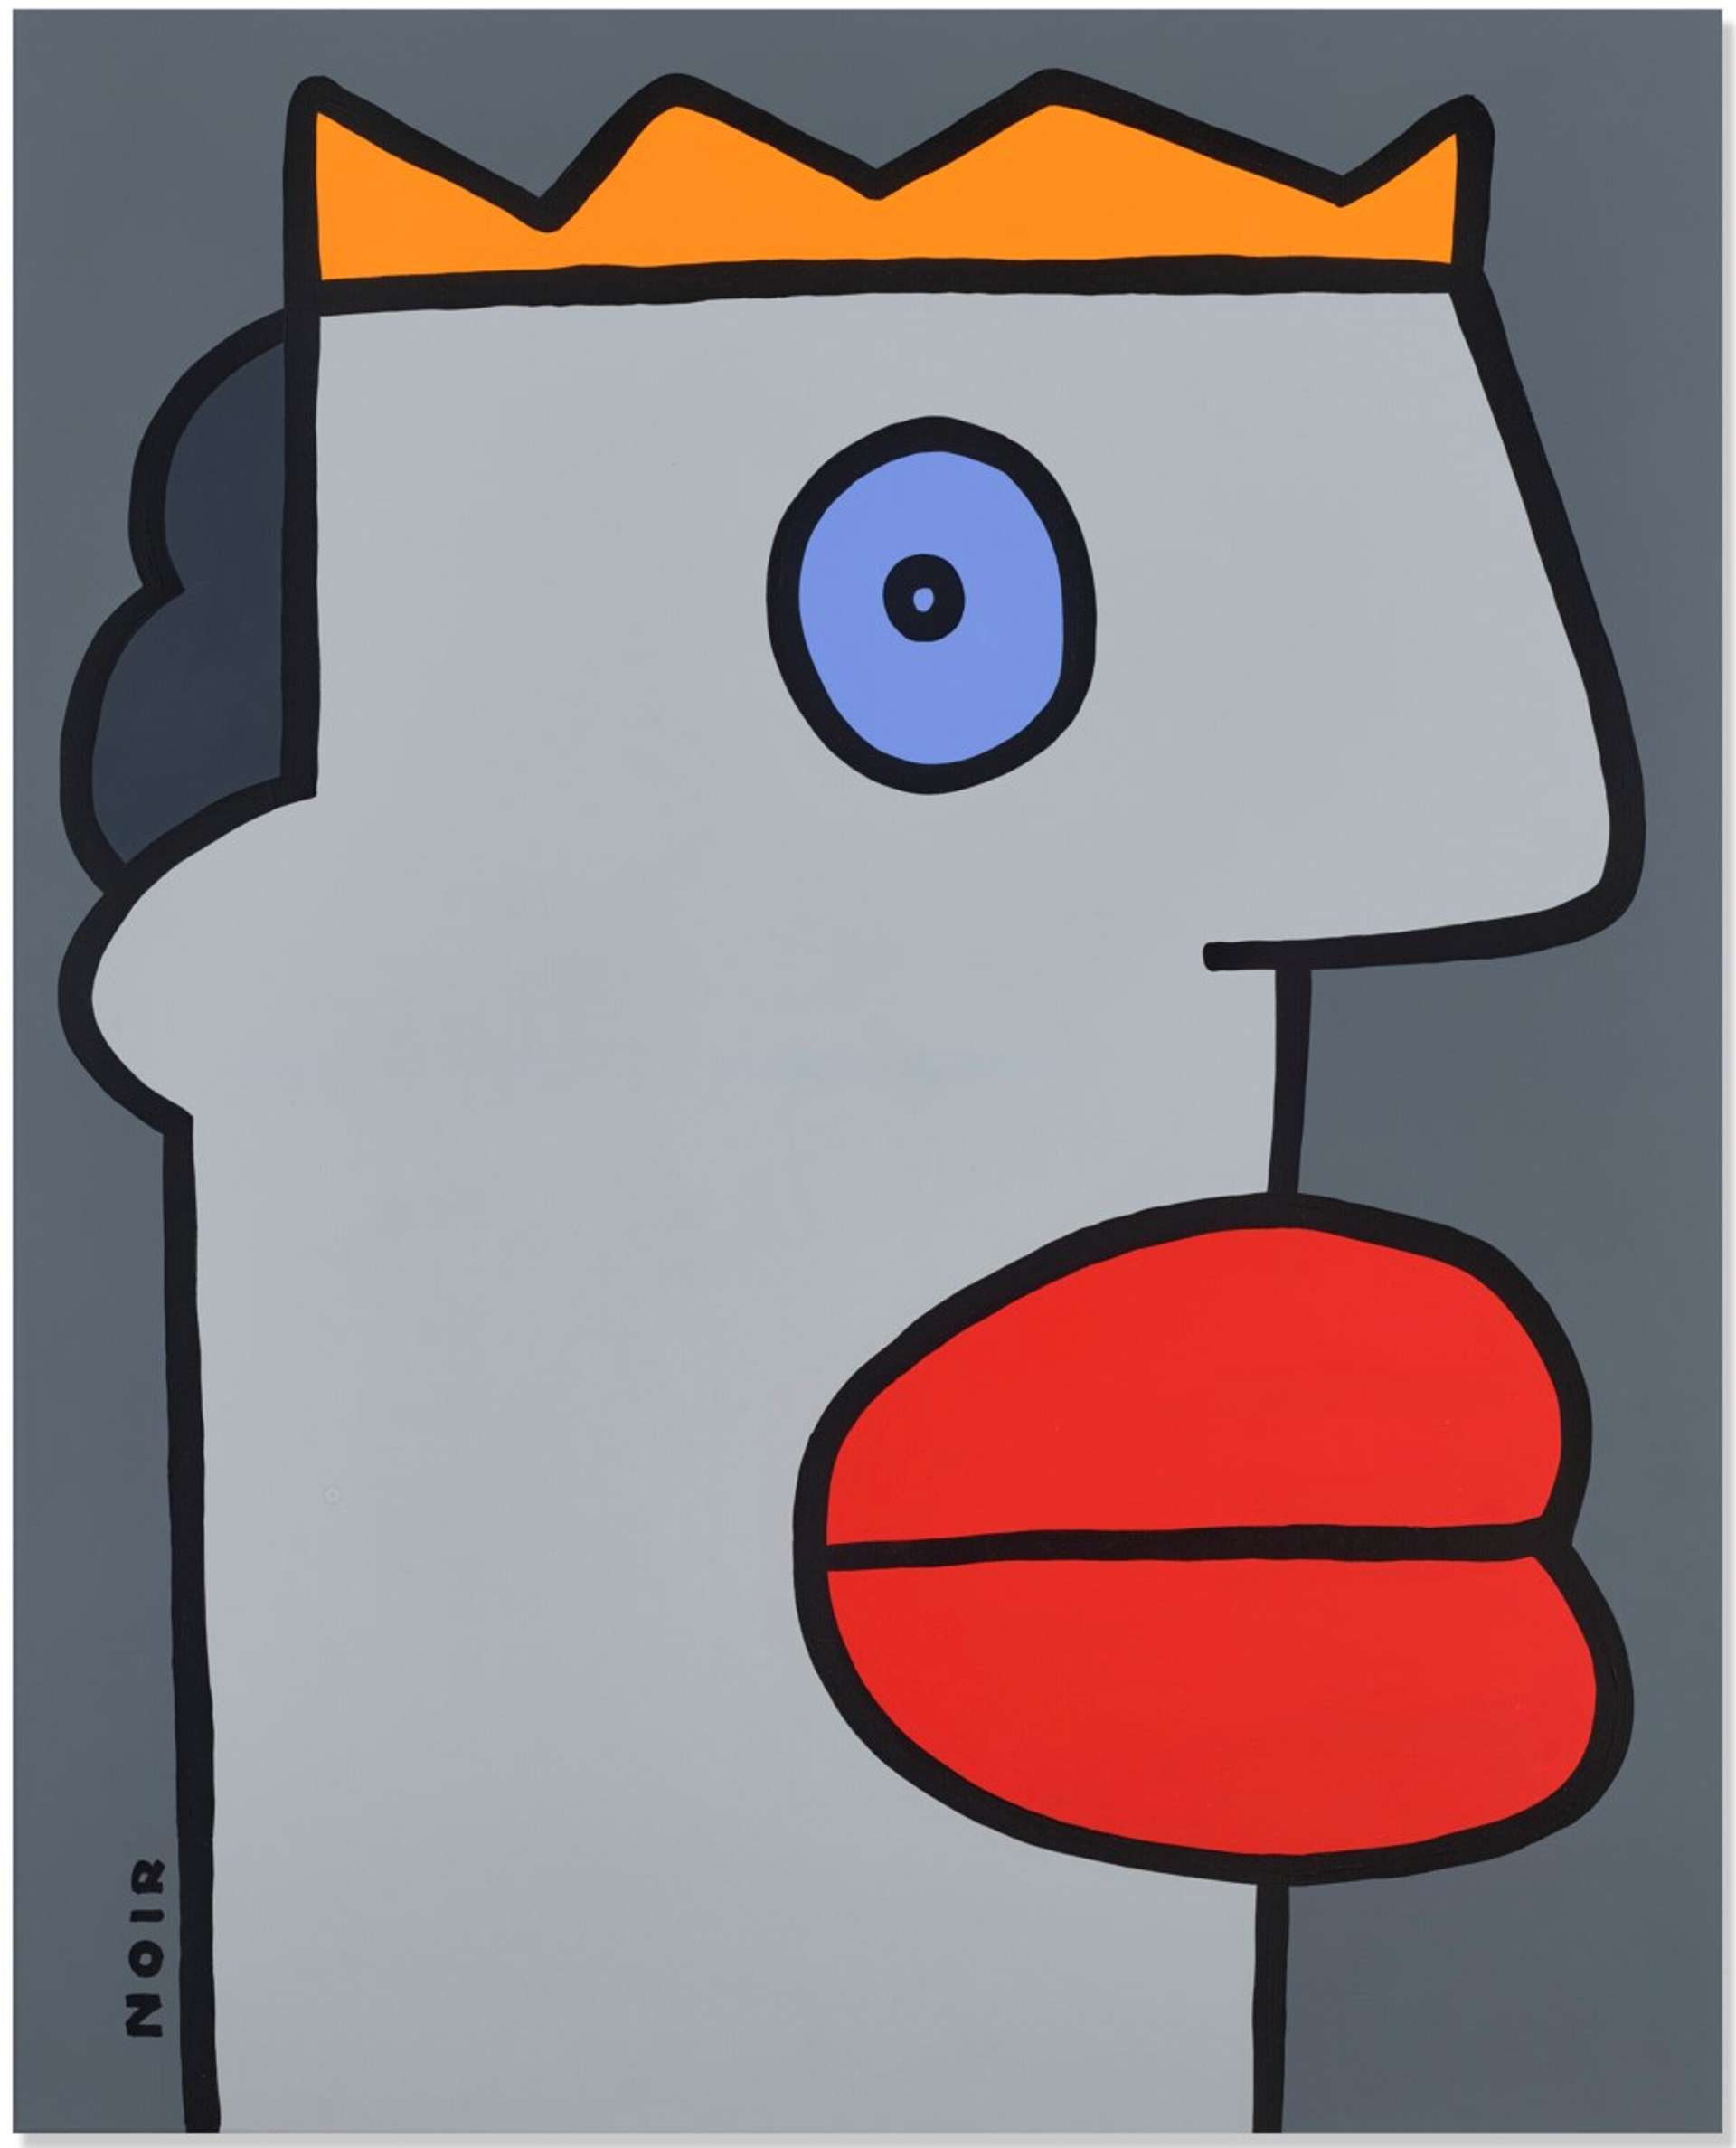  An abstracted palette of greys, red, blue, and orange showcases a bold caricature face drawn in black lines. The side portrait view reveals exaggerated lips in red, an eye in blue, and an orange element that can be interpreted as hair or a crown.